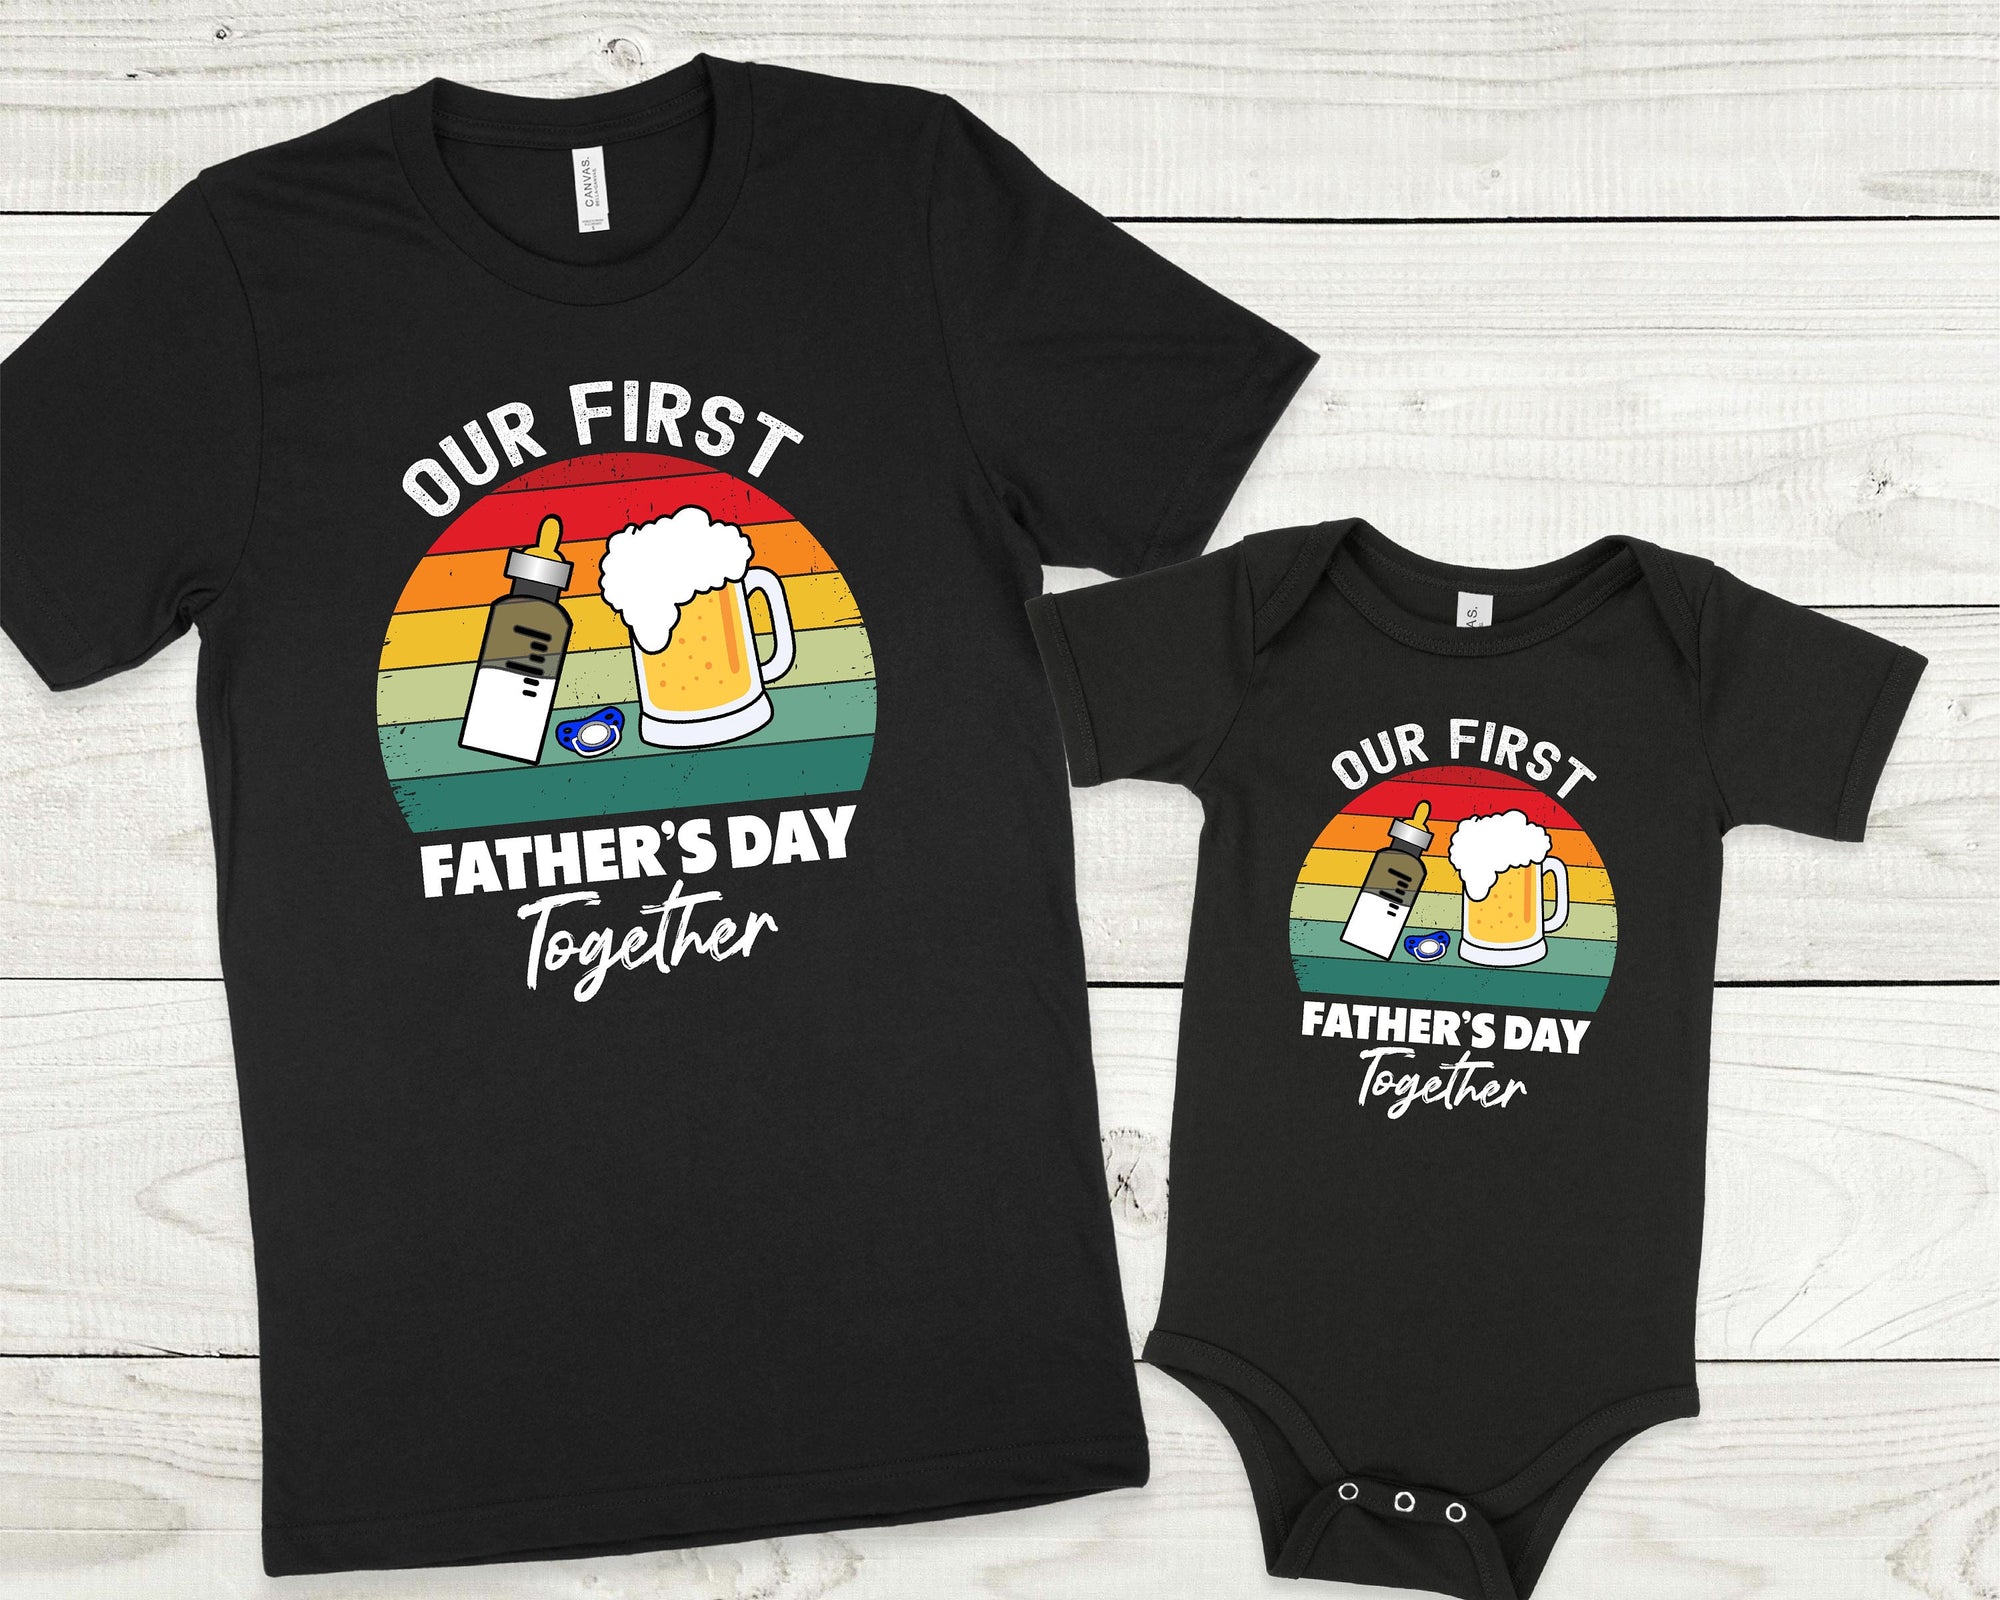 Our First Father's Day Together Matching Outfits, Drinking Buddies Matching Shirts, Daddy Daughter, 1st Father's Day, Father's Day Gift